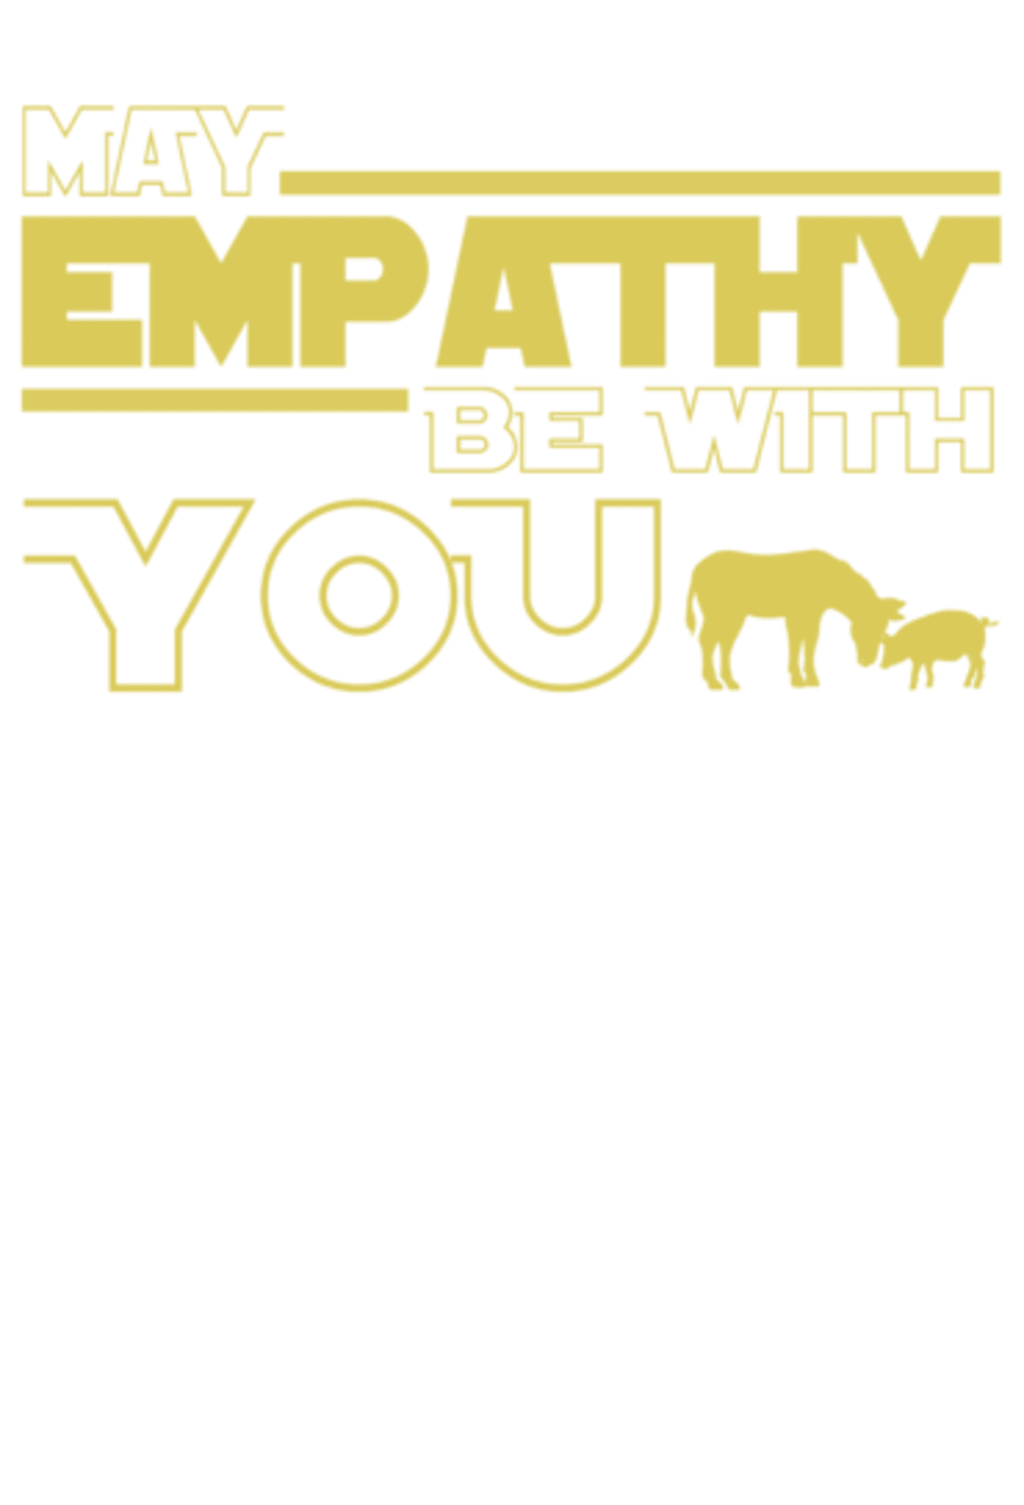 May empathy be with you